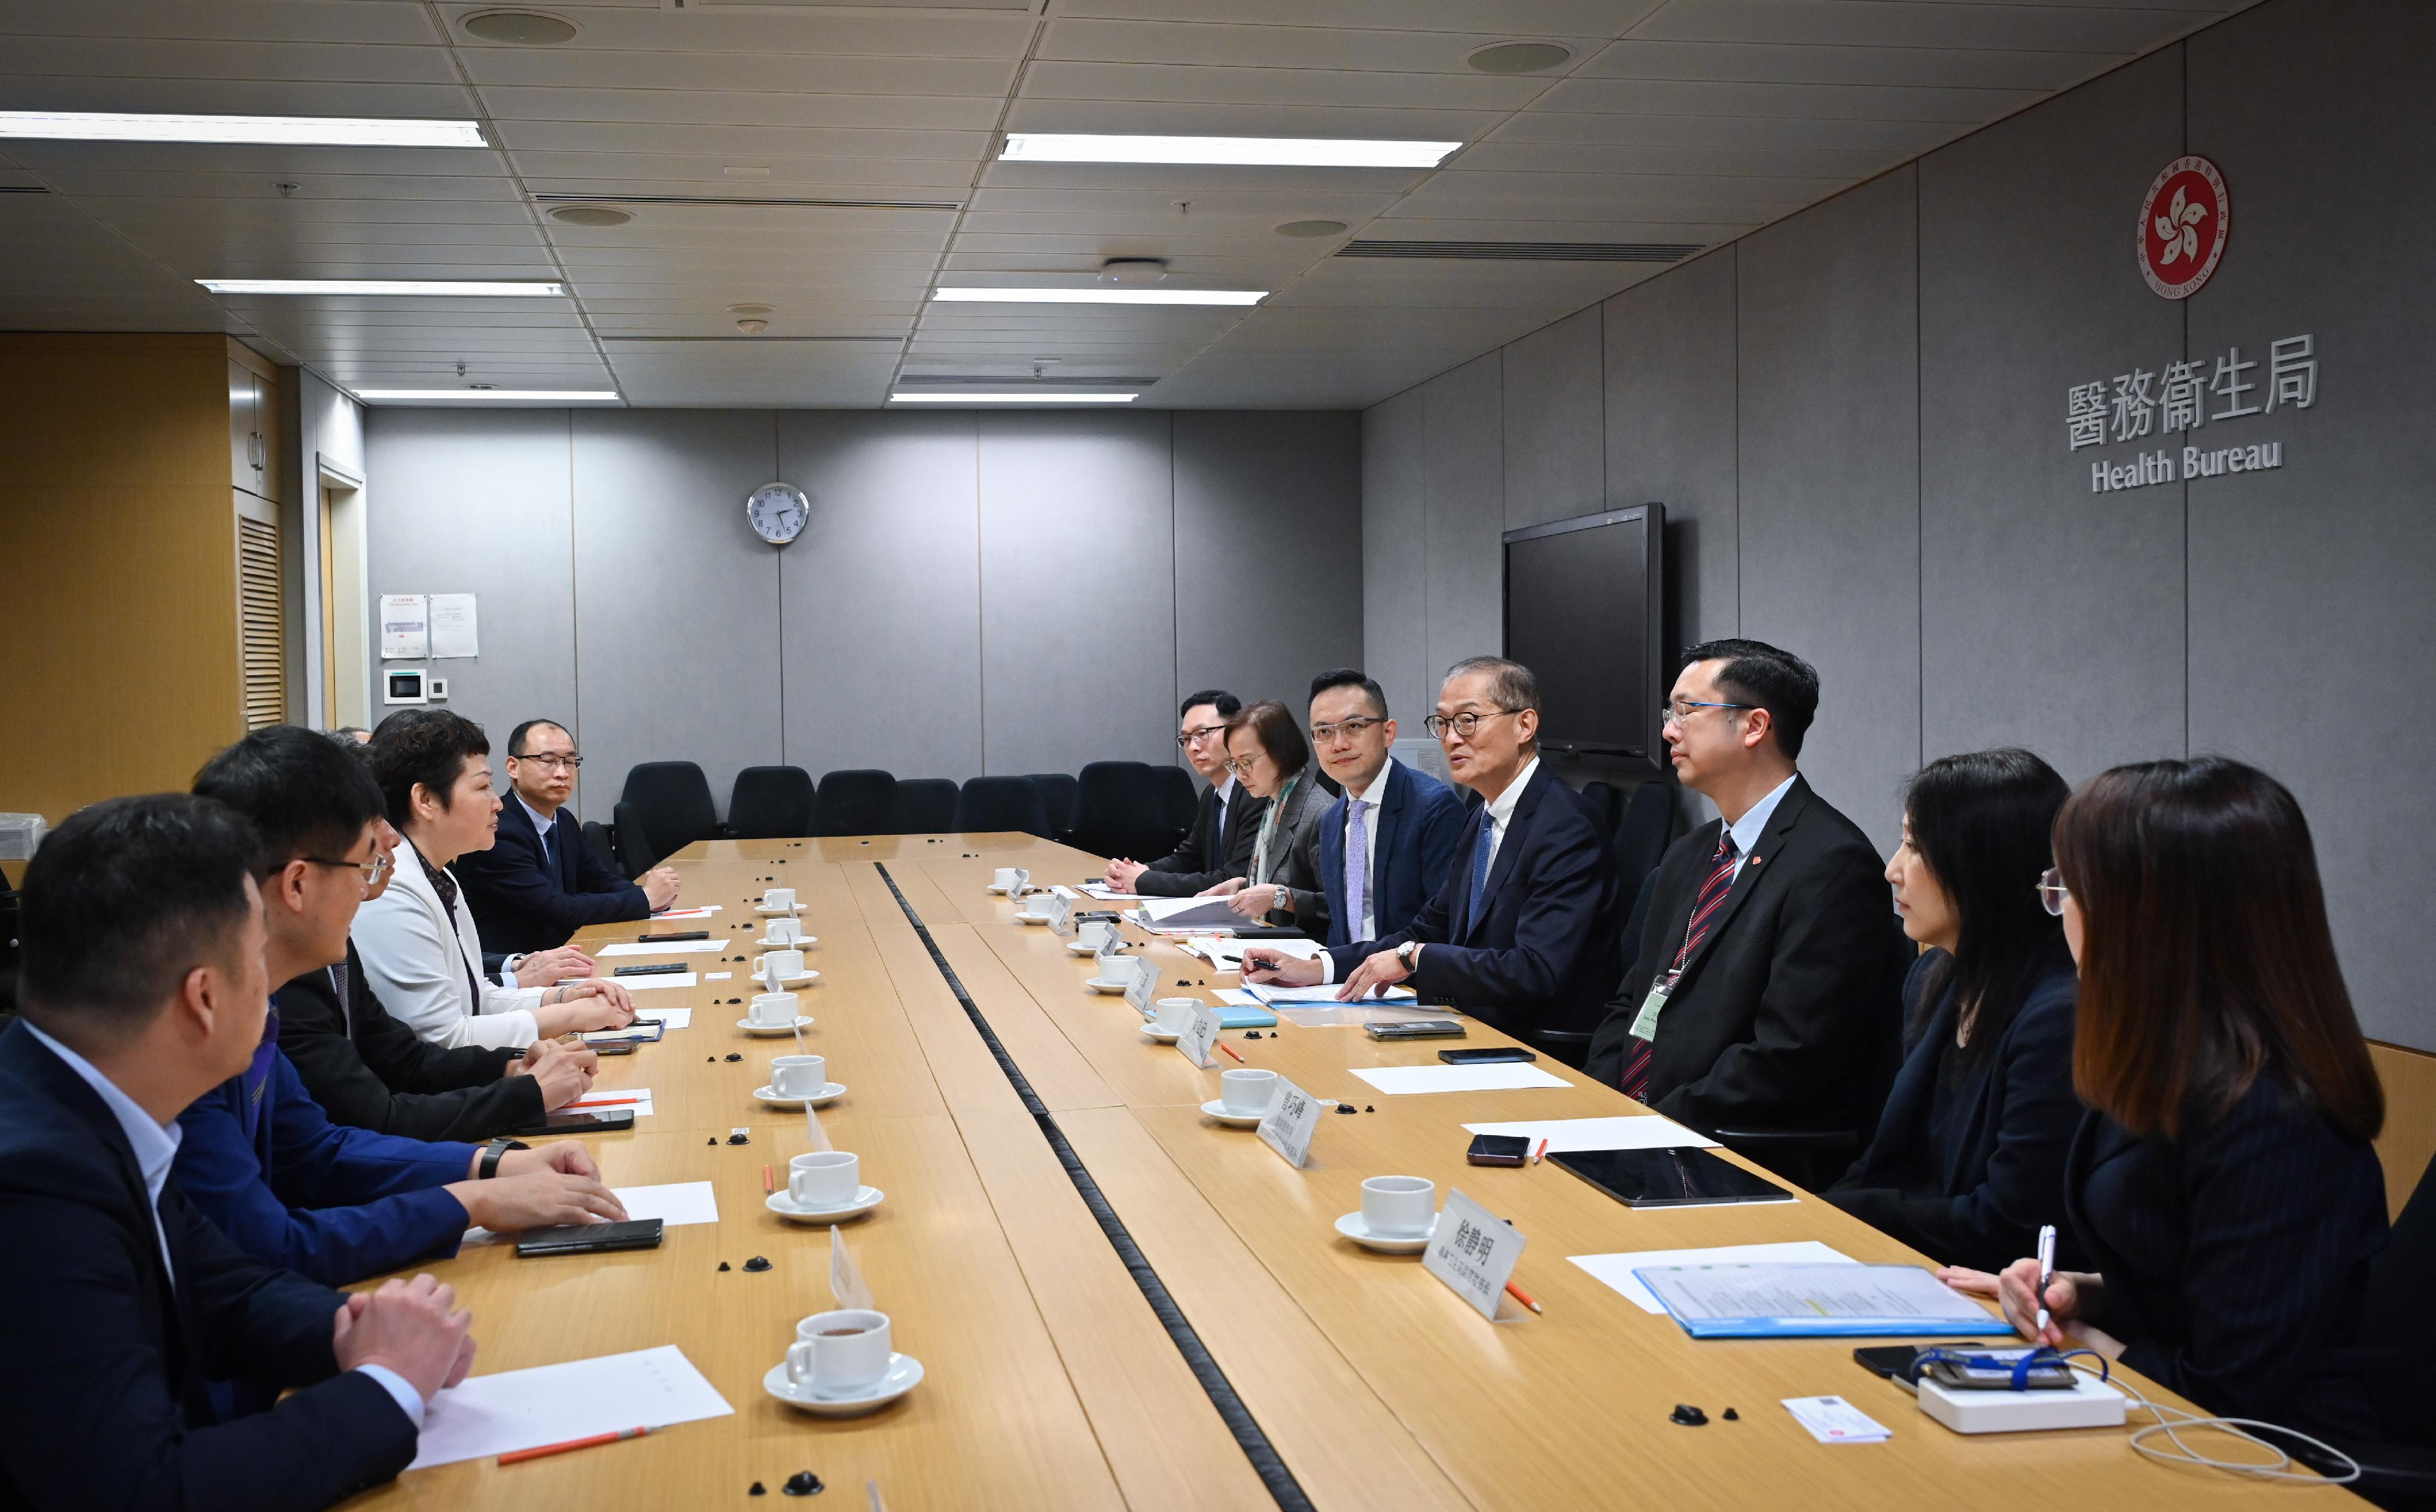 The Secretary for Health, Professor Lo Chung-mau (fourth right), meets Deputy Director of the Tianjin Municipal Health Commission Ms Han Xiaofen (fourth left), and her delegation today (May 17) to explore ways of strengthening co-operation in the area of healthcare, with the Director of Health, Dr Ronald Lam (fifth right), in attendance.